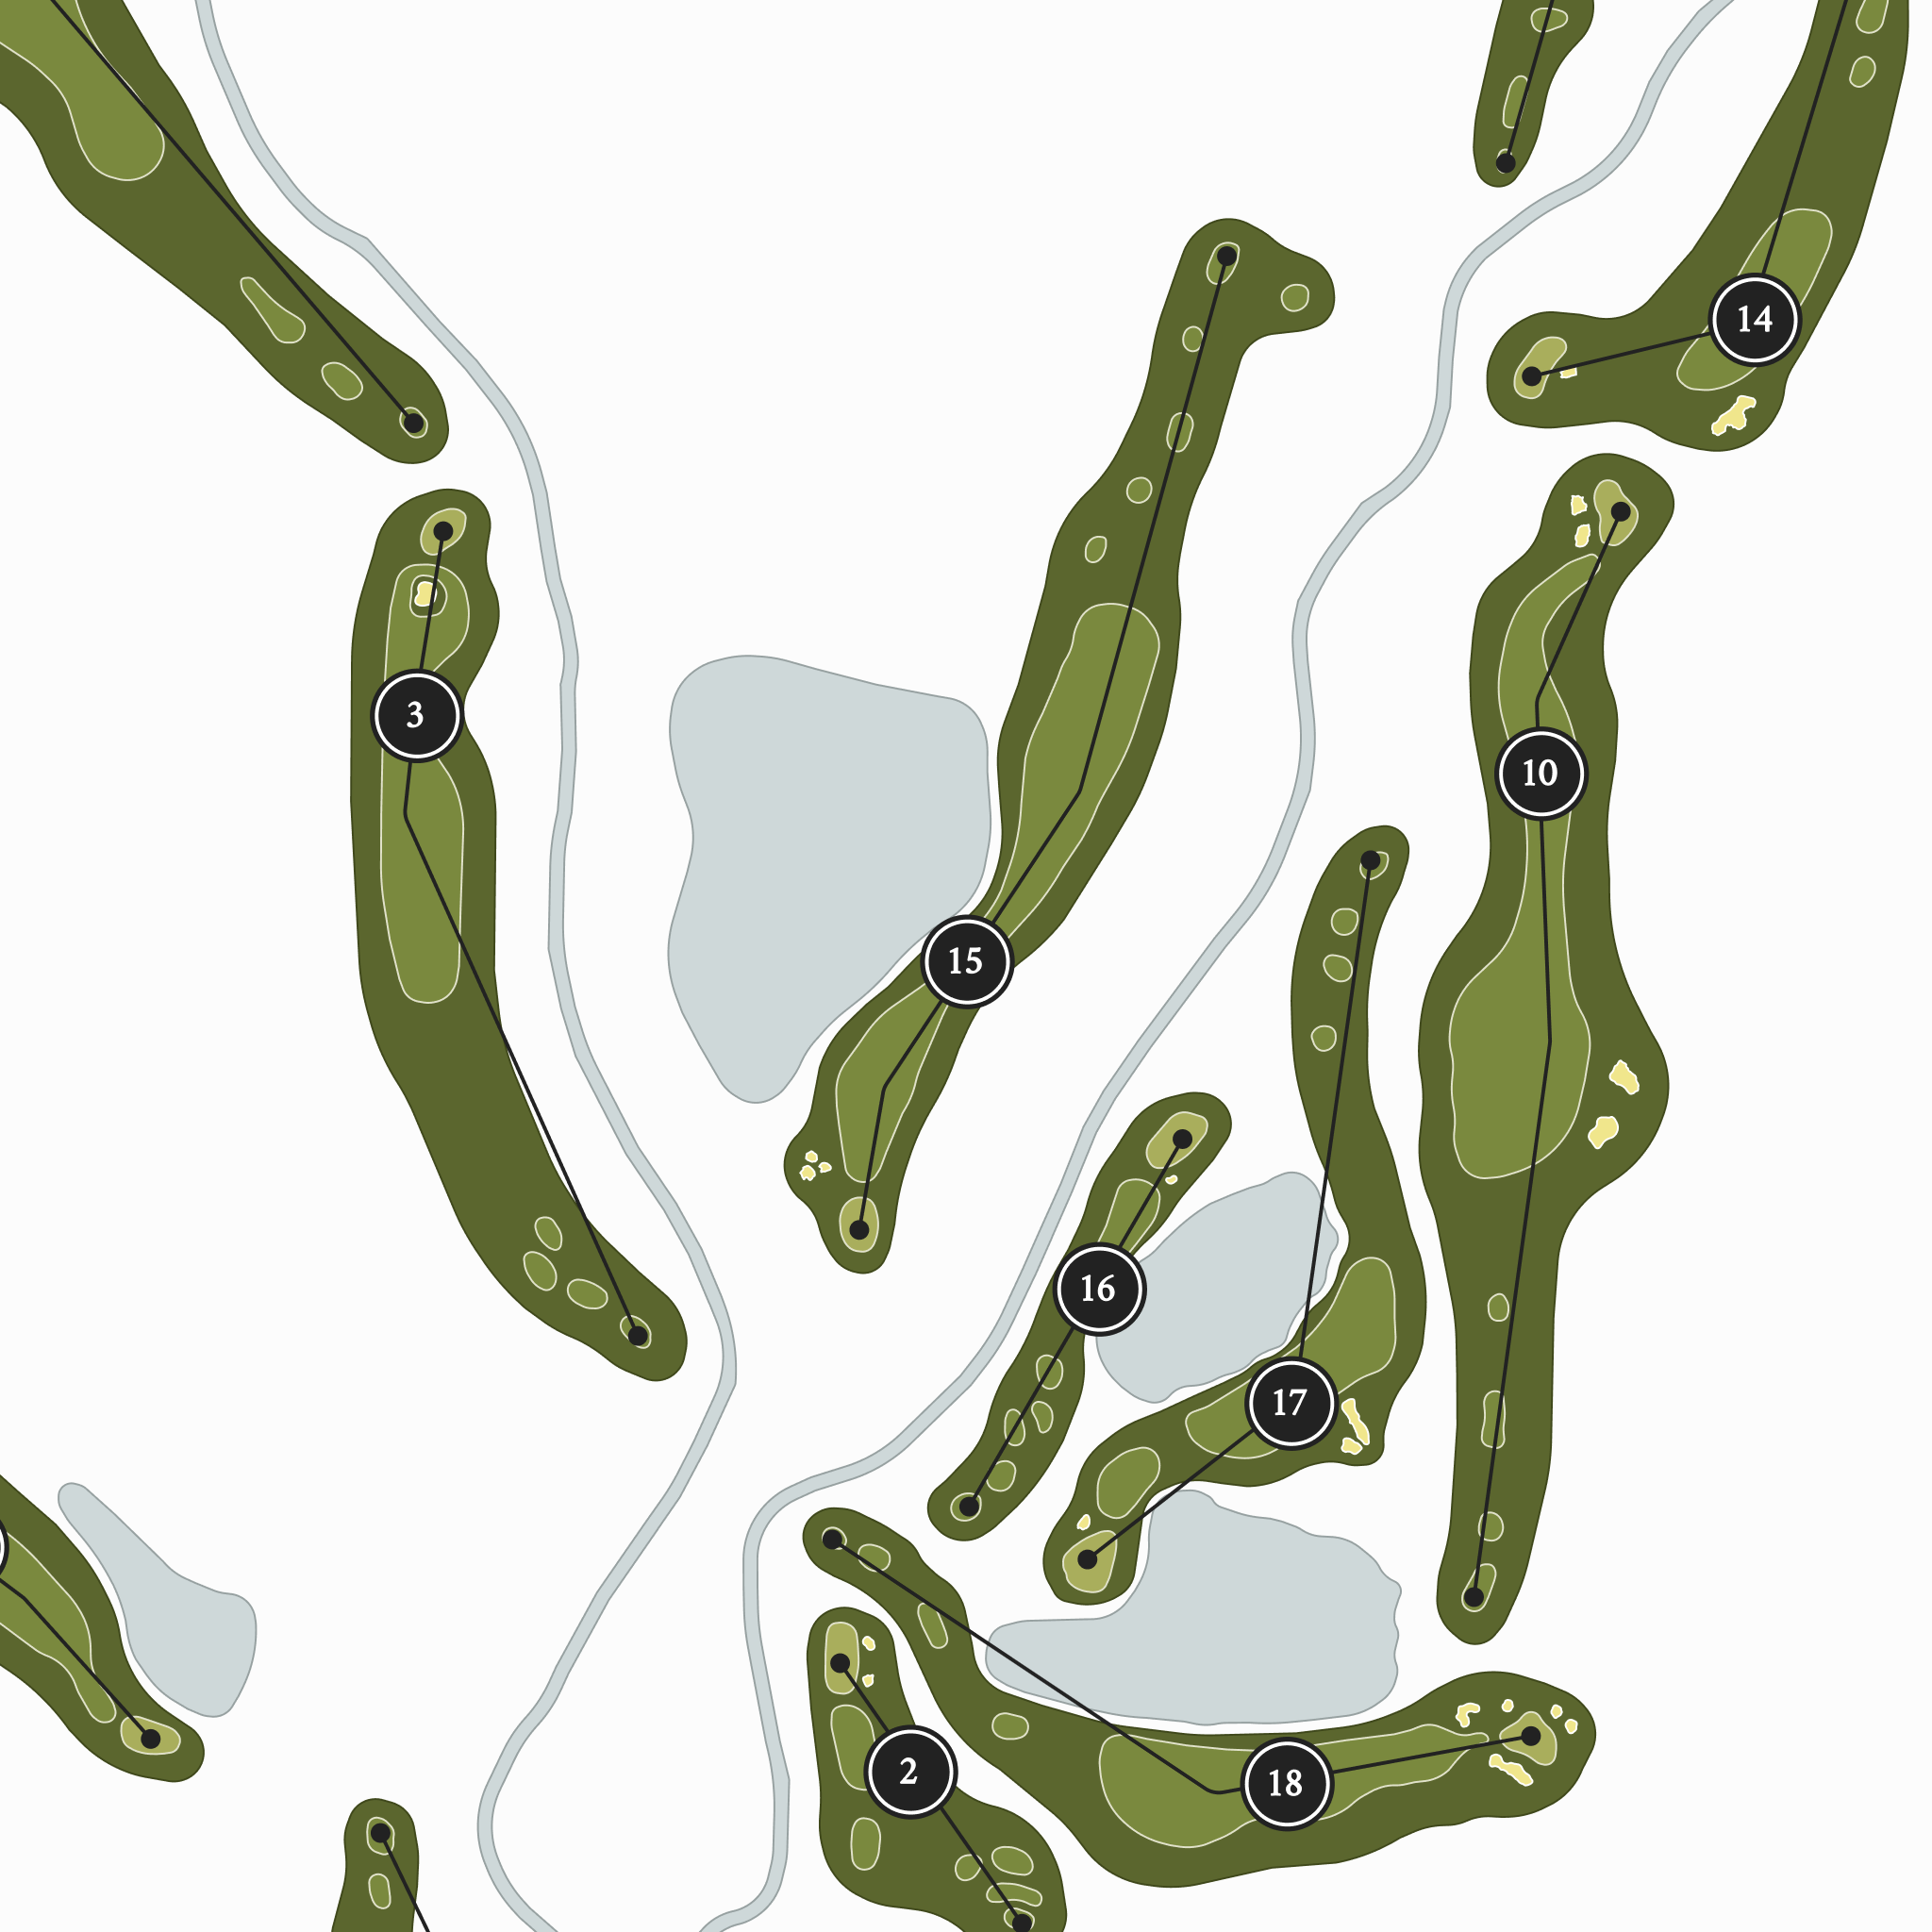 Twin Creeks Golf Course | Golf Course Map | Close Up